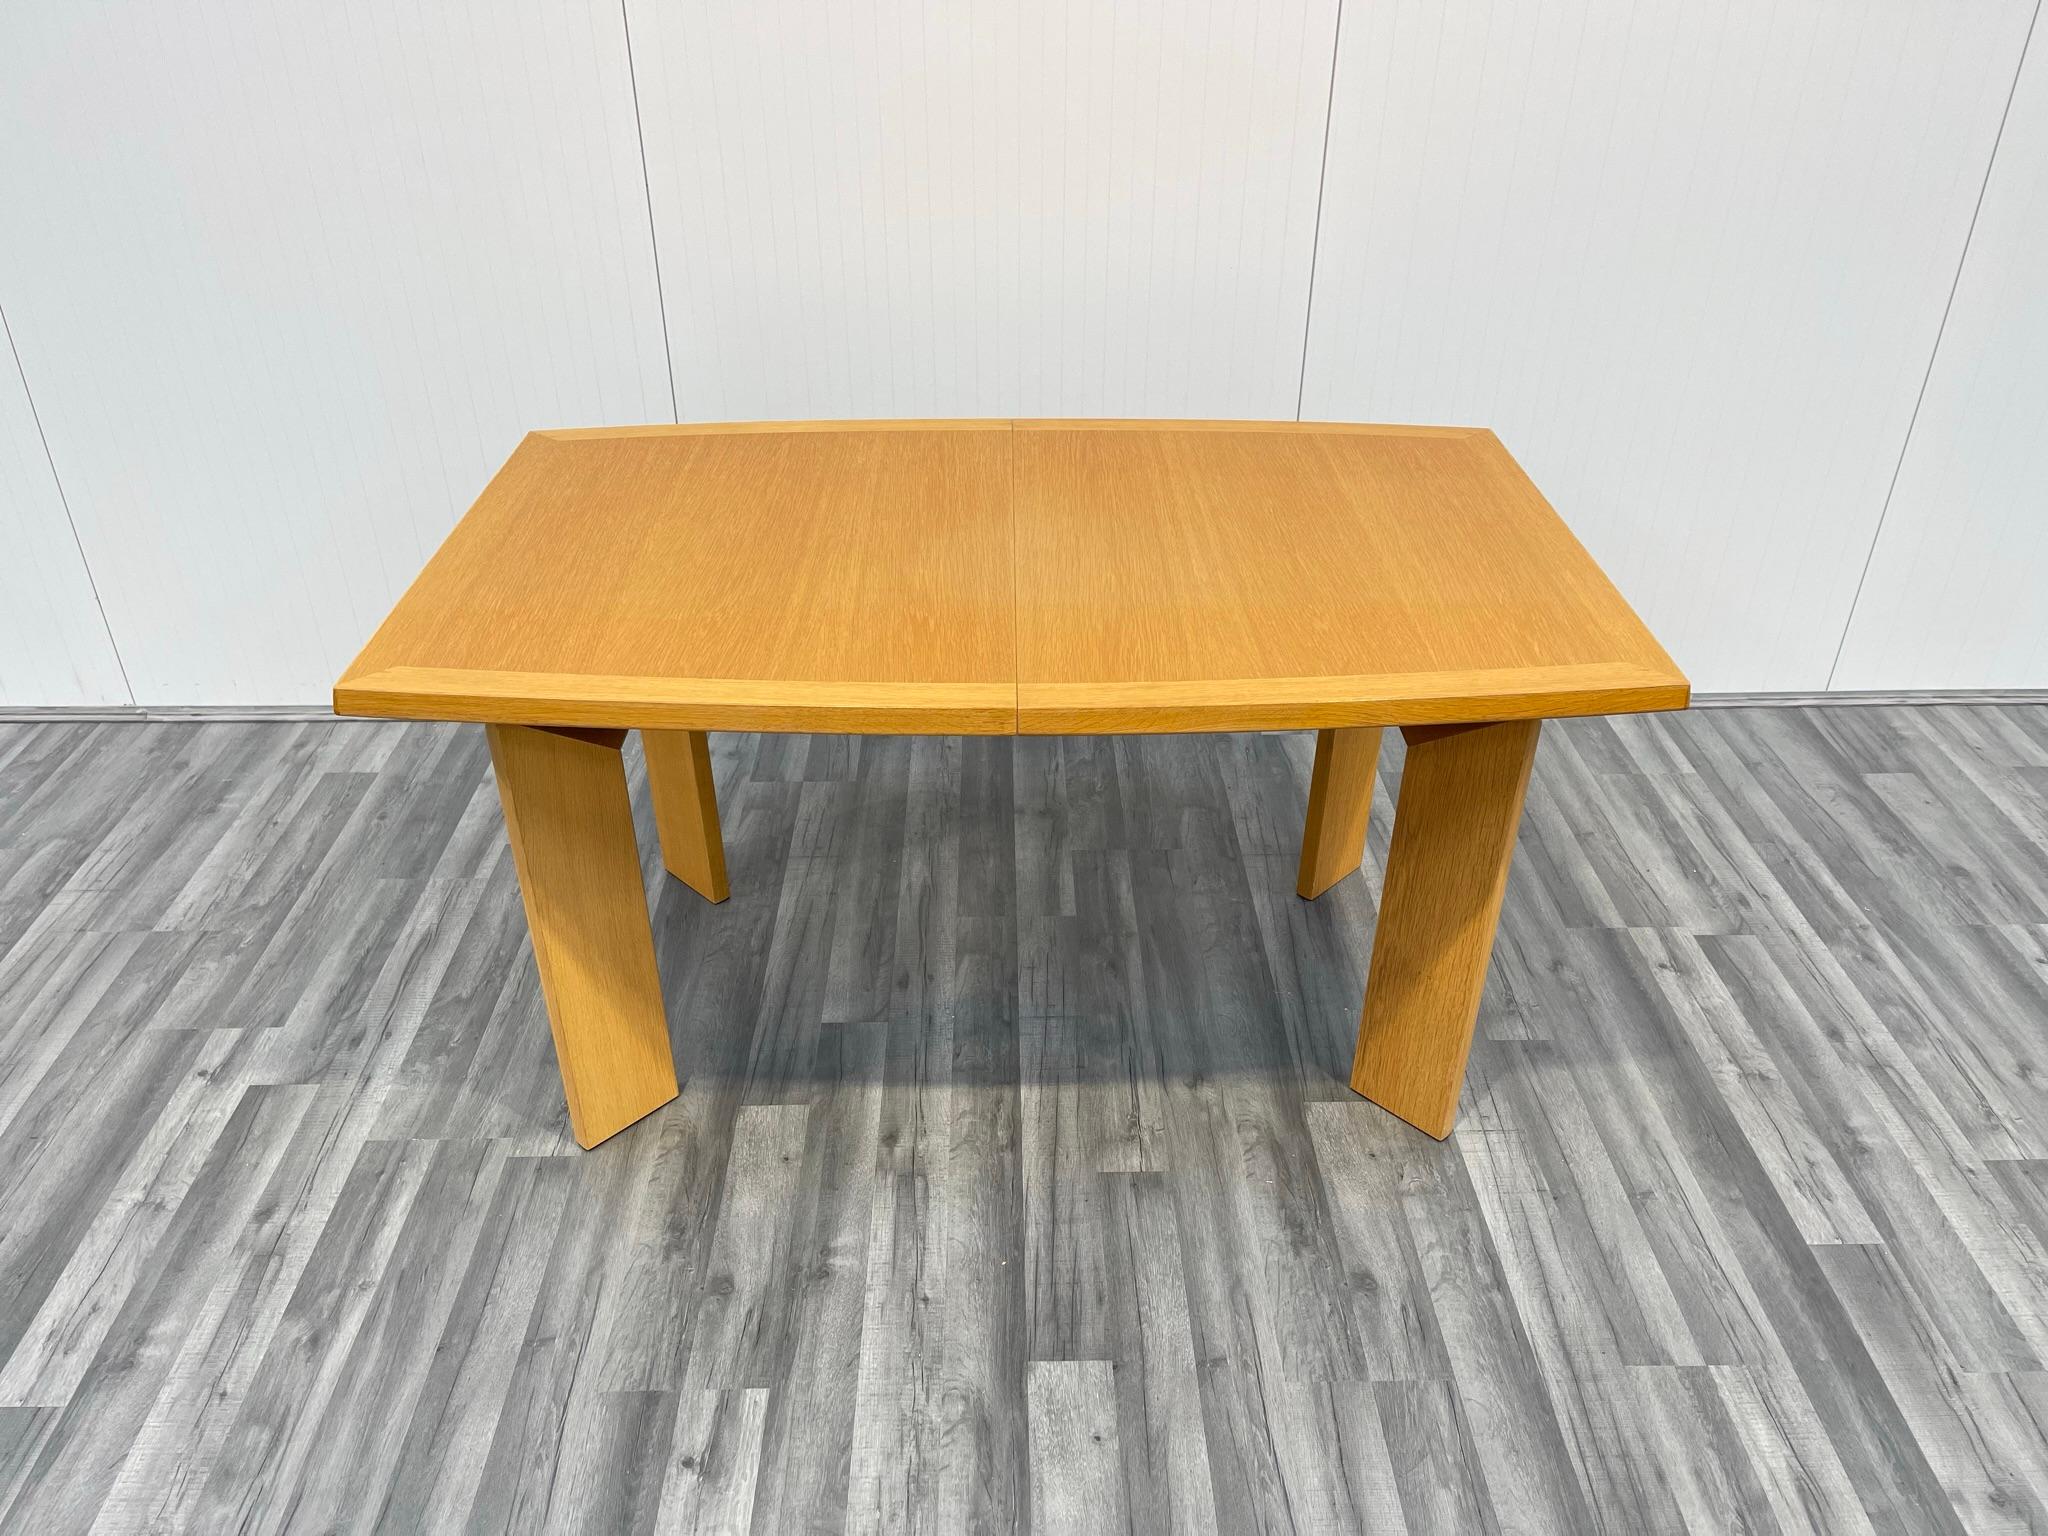 This is a beautiful dining table, designed and manufactured in Denmark. This cleverly designed and elegant table is relatively compact and space saving when unextended but features two additional leaves that fit easily in place to allow the table to